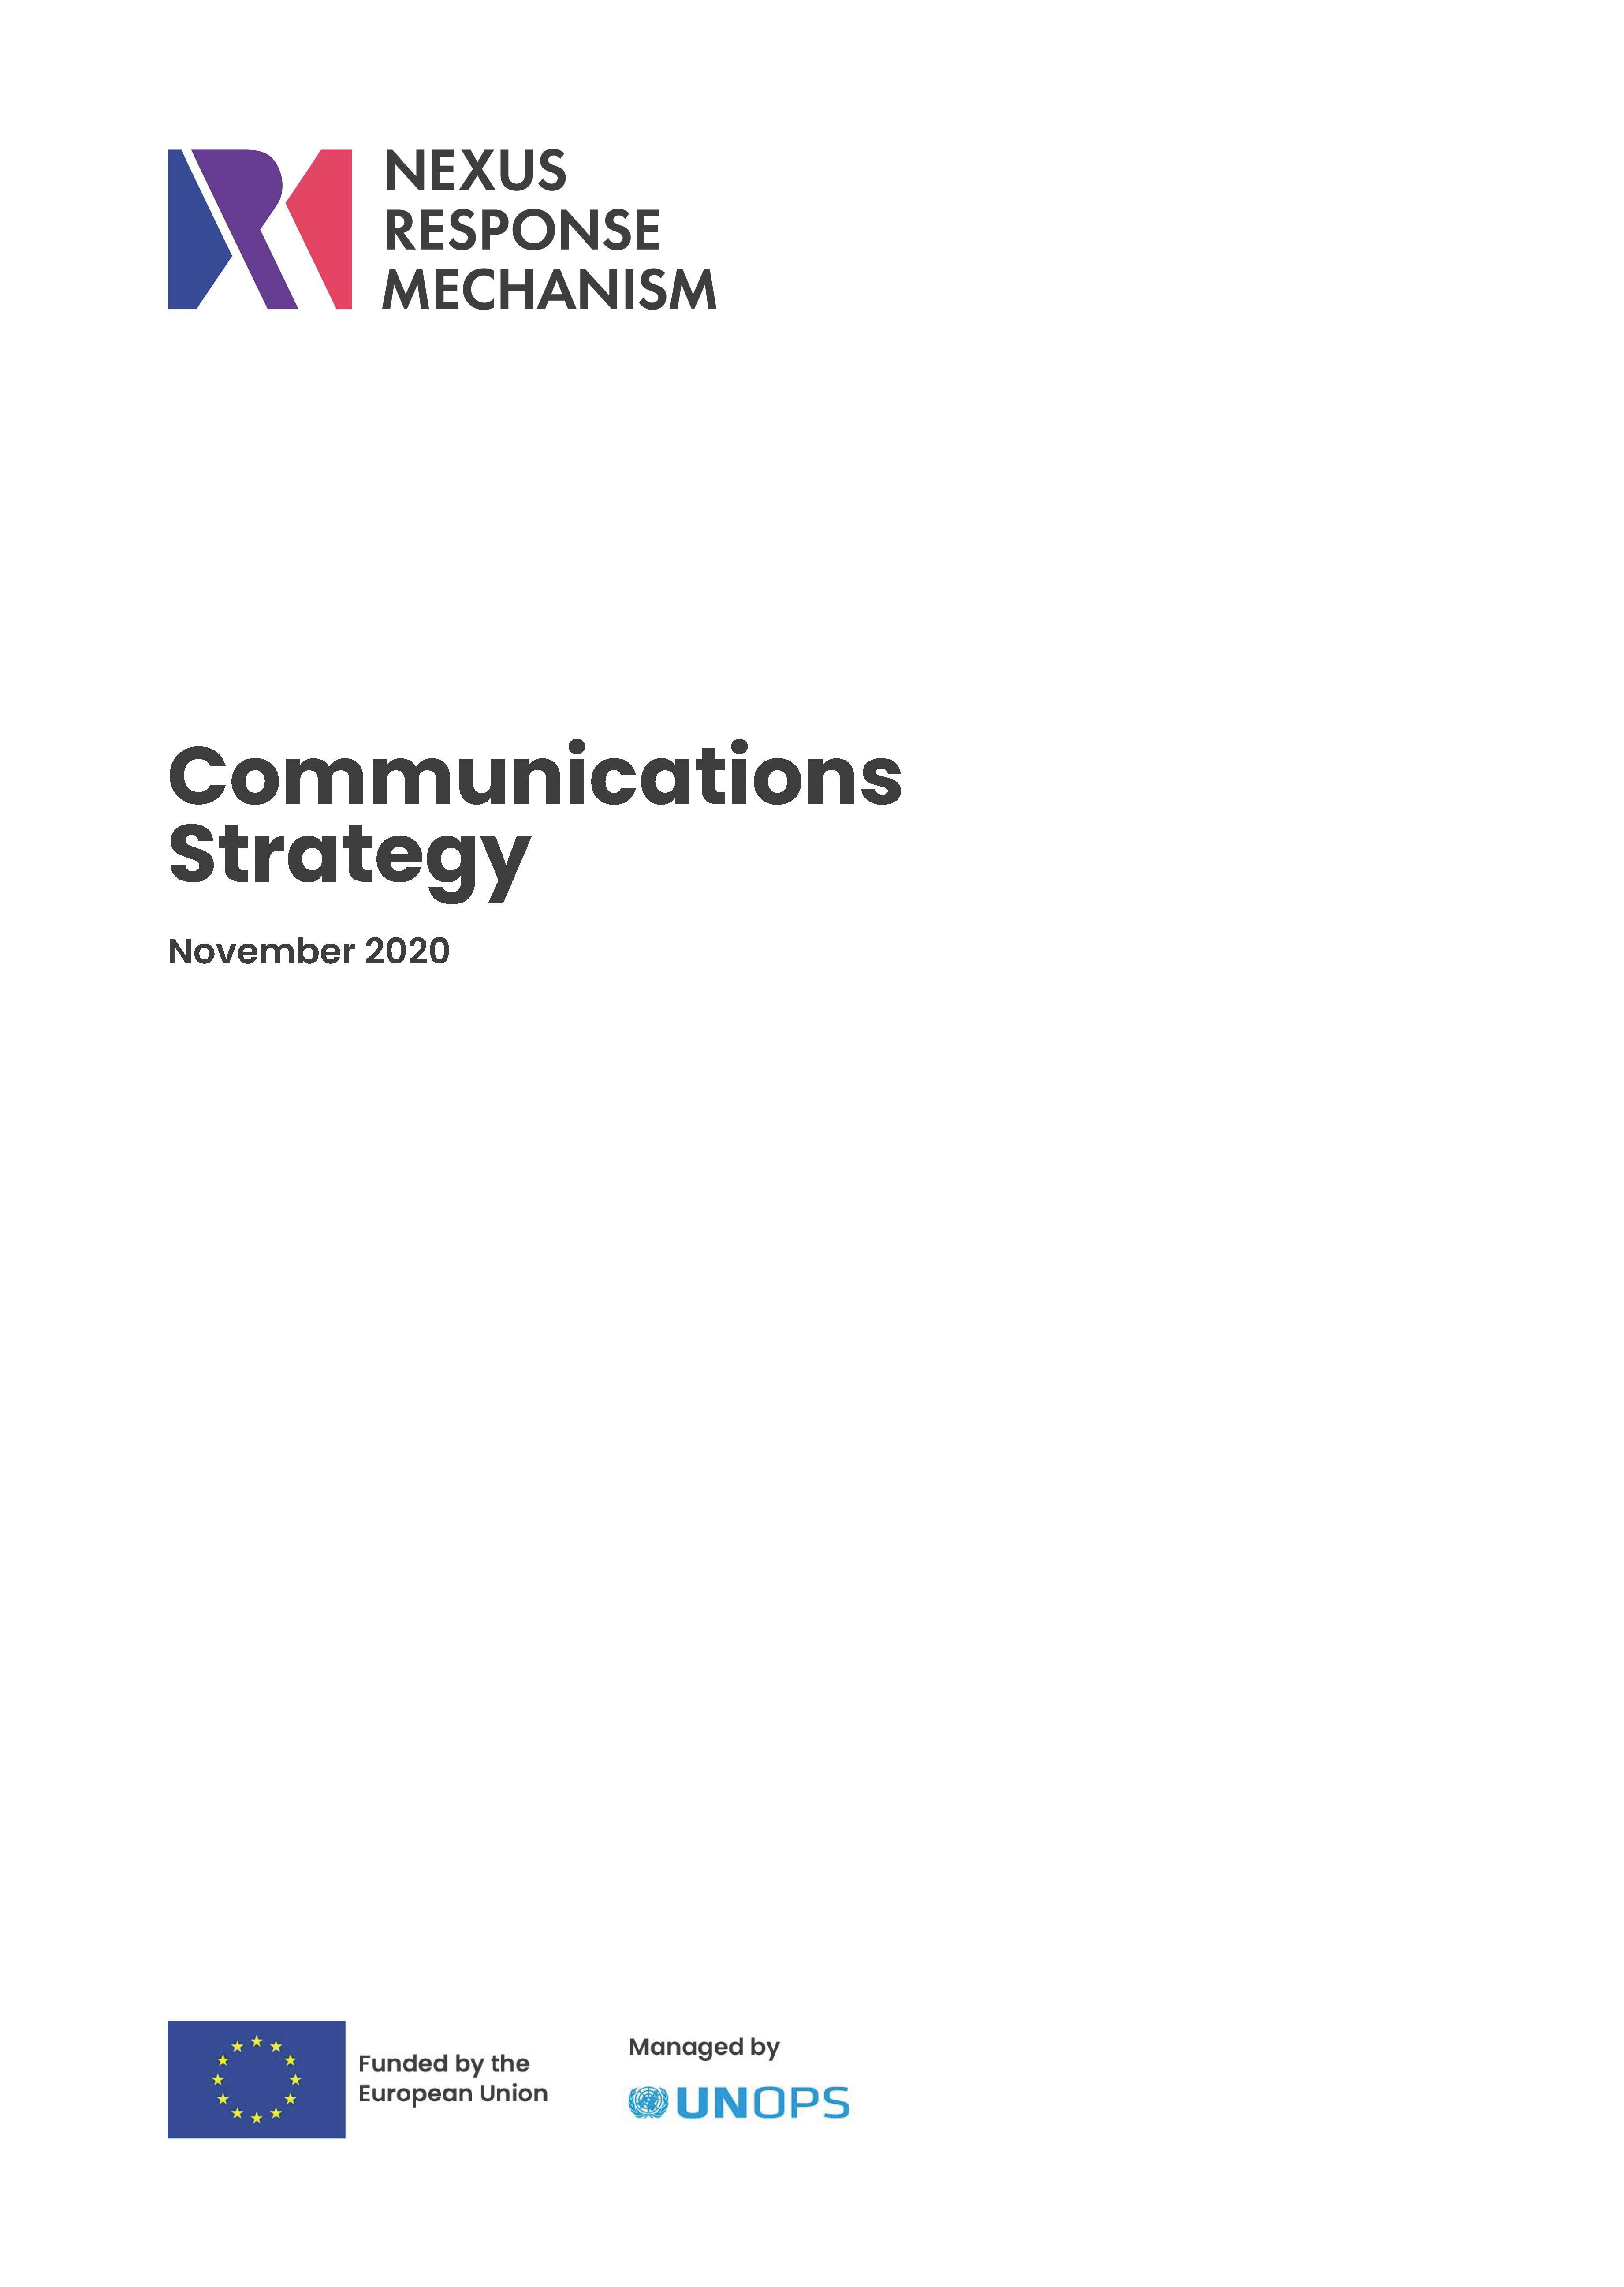 Cover page for Nexus Response Mechanism Communications Strategy